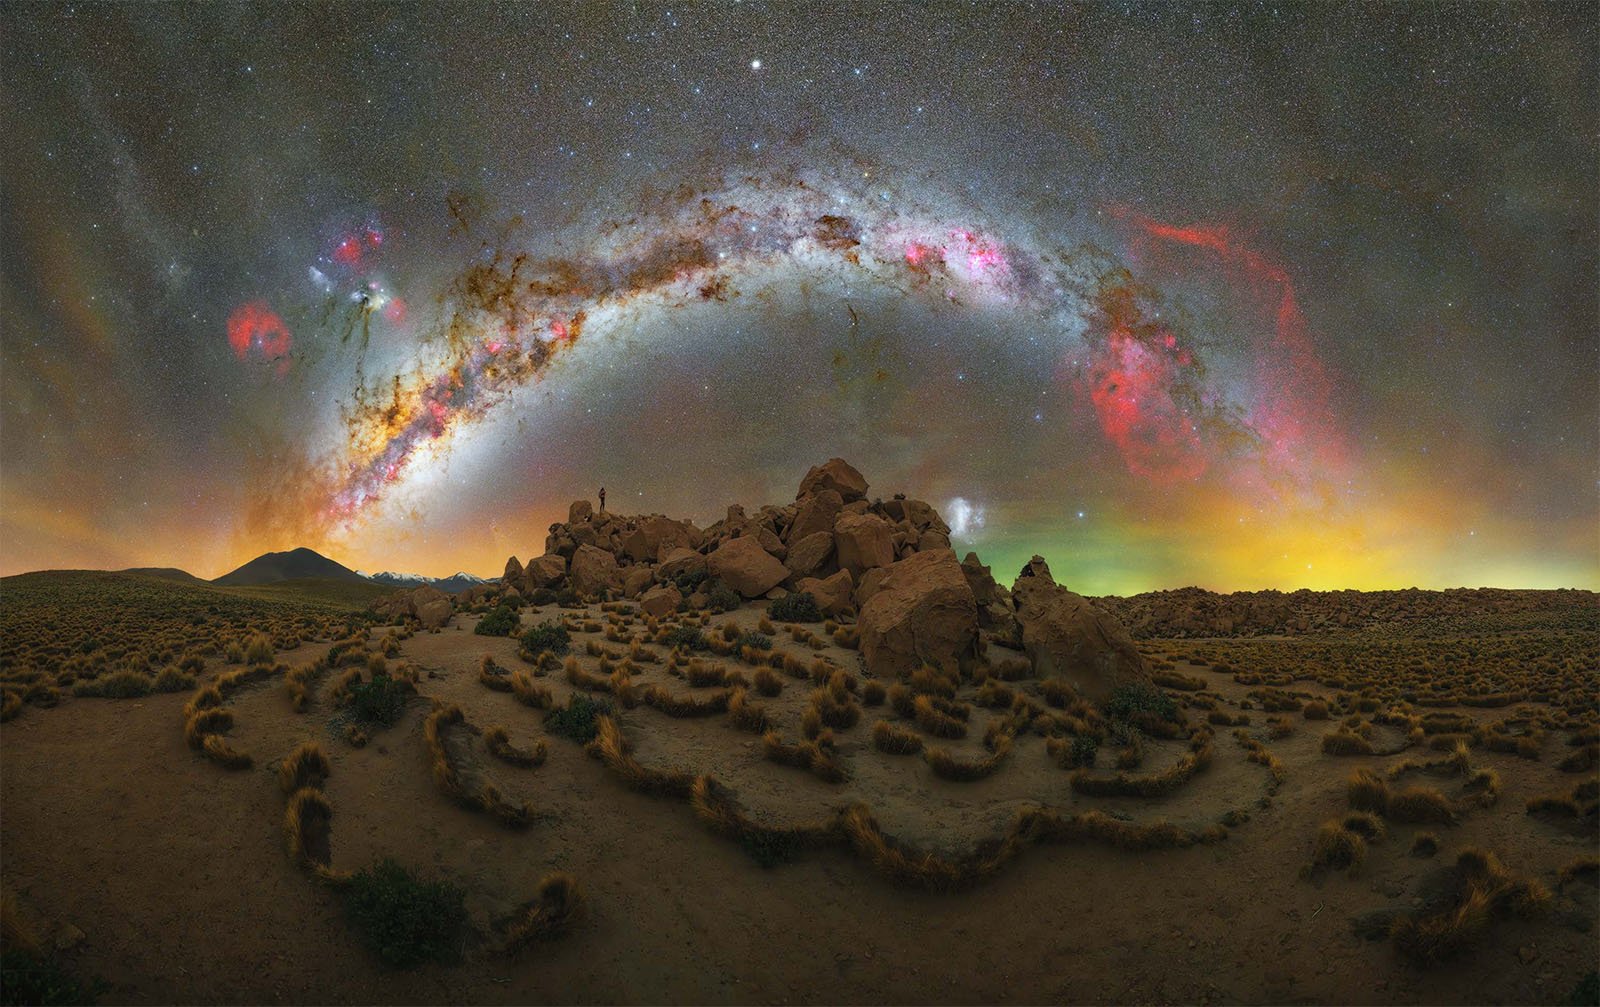  Panoramic view of the night sky with a vivid Milky Way arc stretching across a desert landscape. The ground is dotted with tufts of grass and a rocky formation sits at the center. The sky is illuminated with stars and colorful nebulae, presenting a stunning cosmic scene.